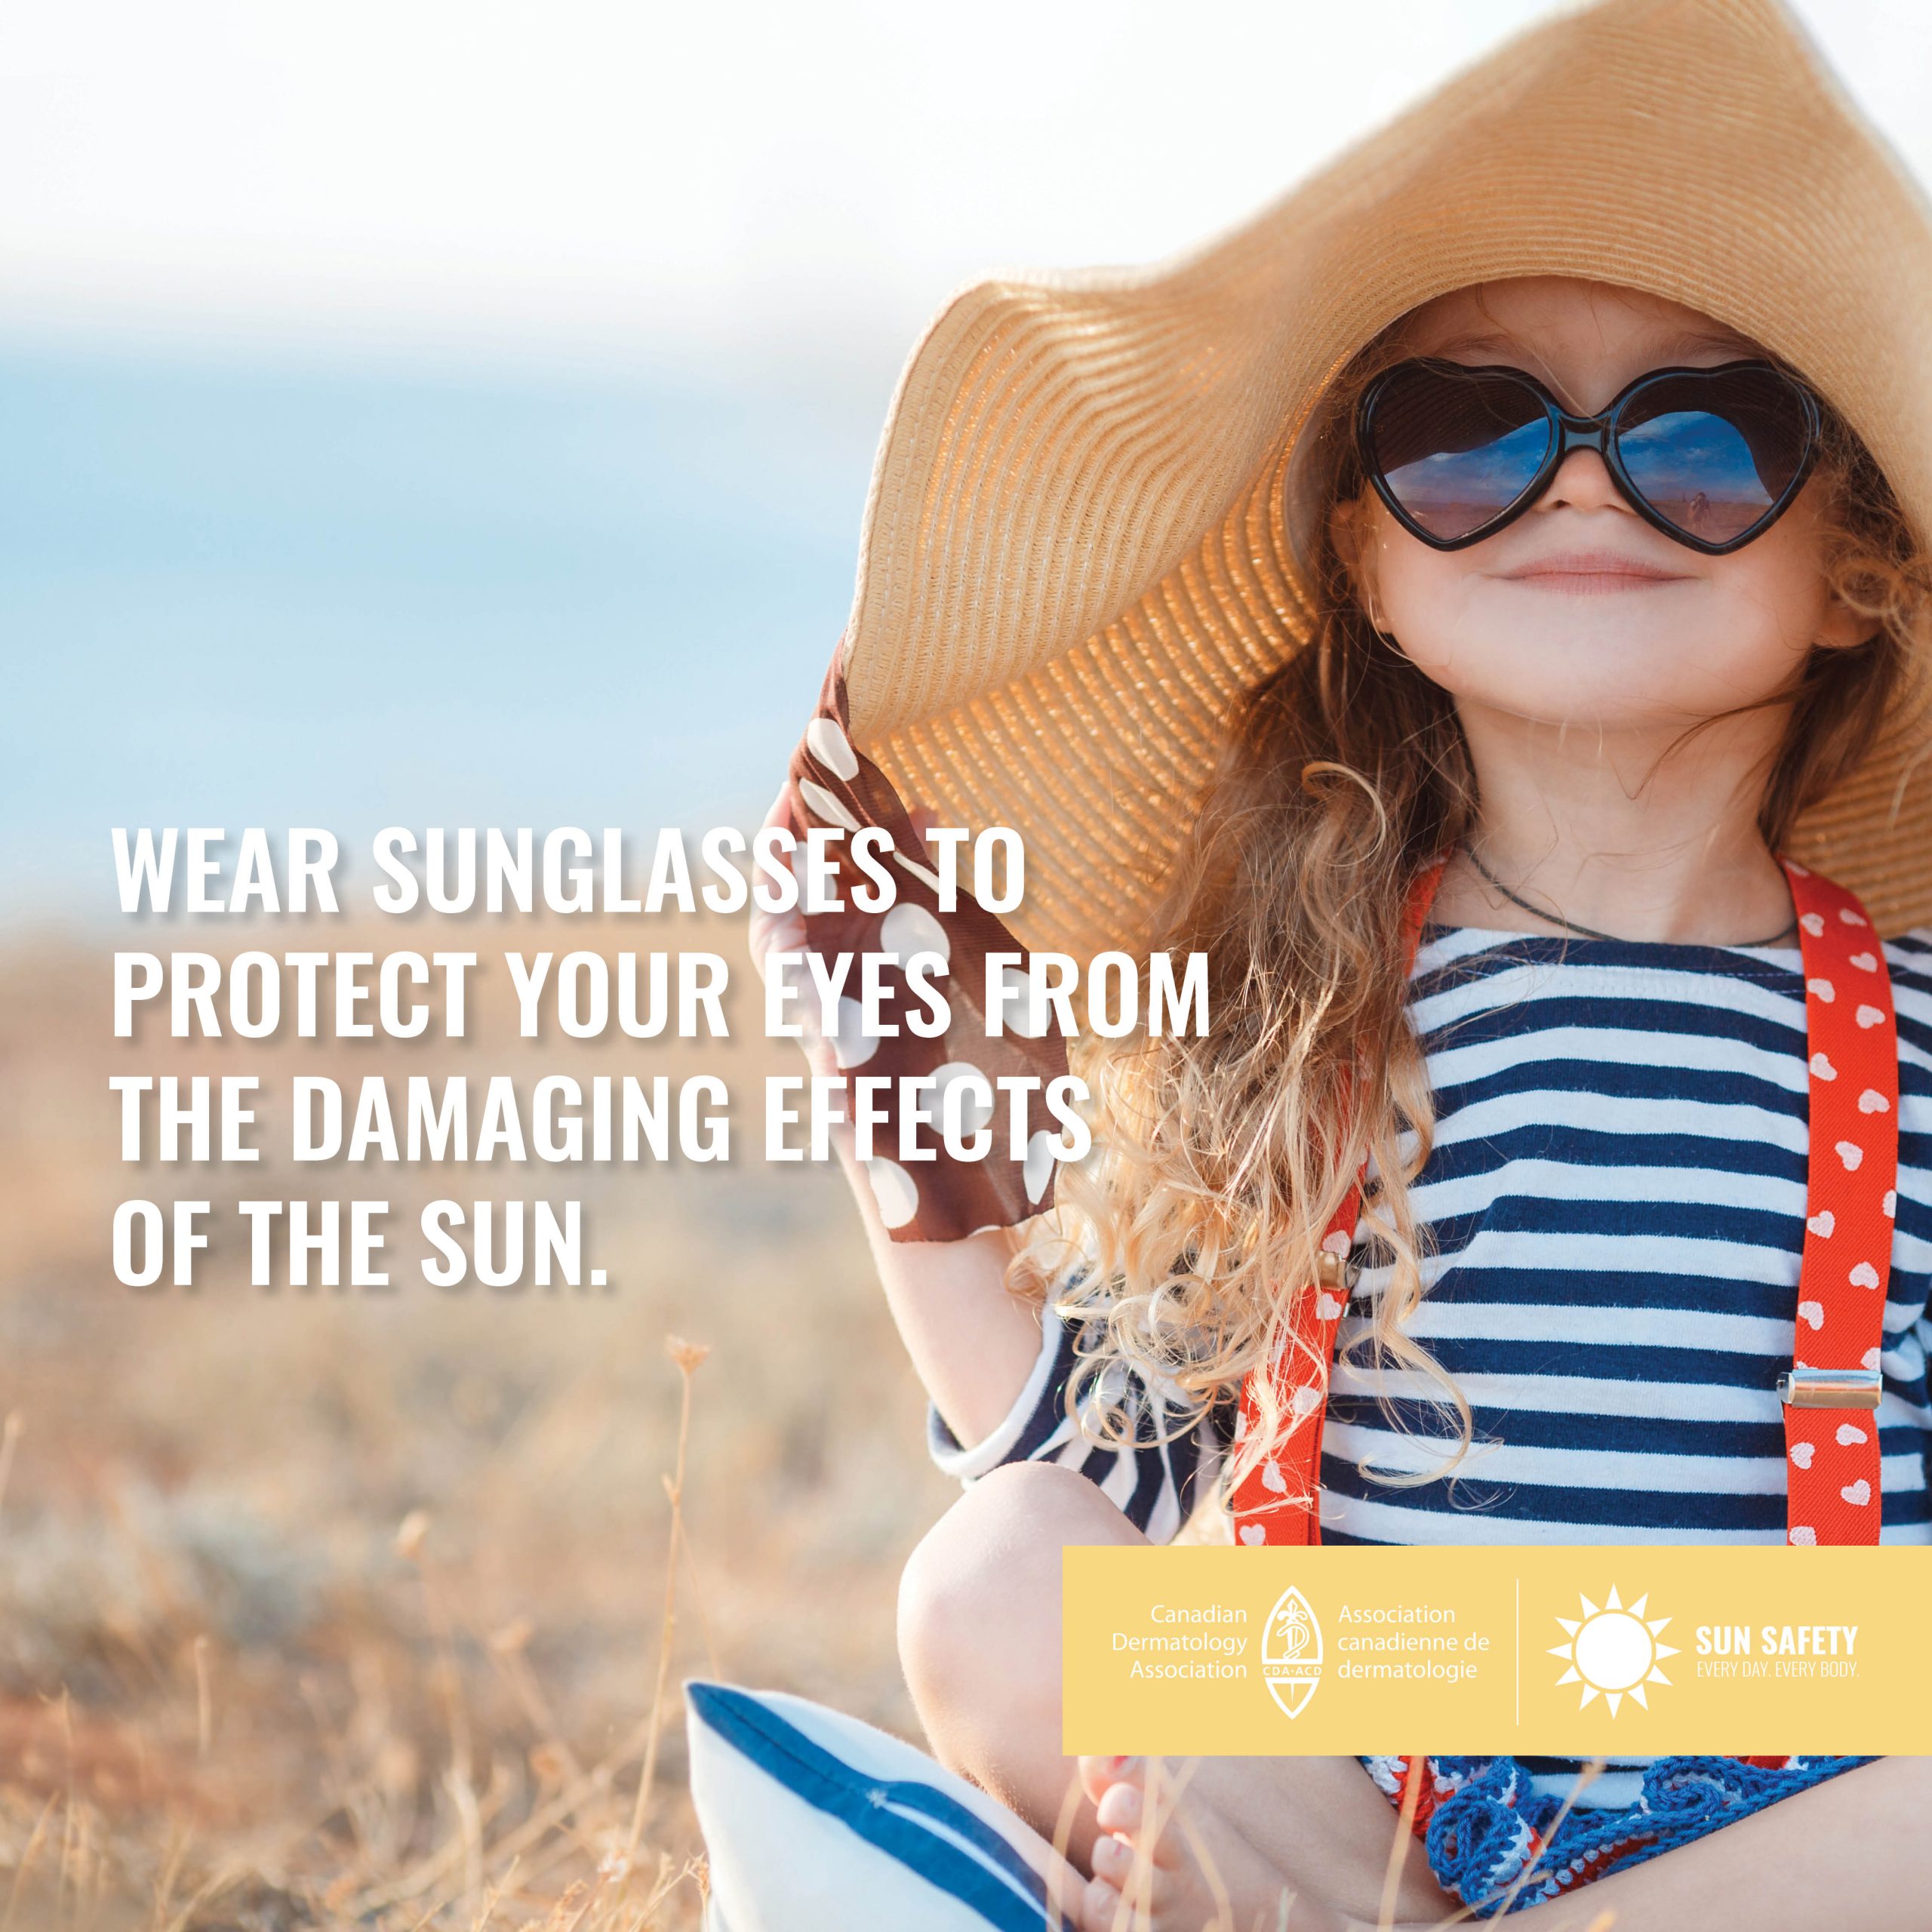 Wear sunglasses to protect your eyes from the damaging effects of the sun